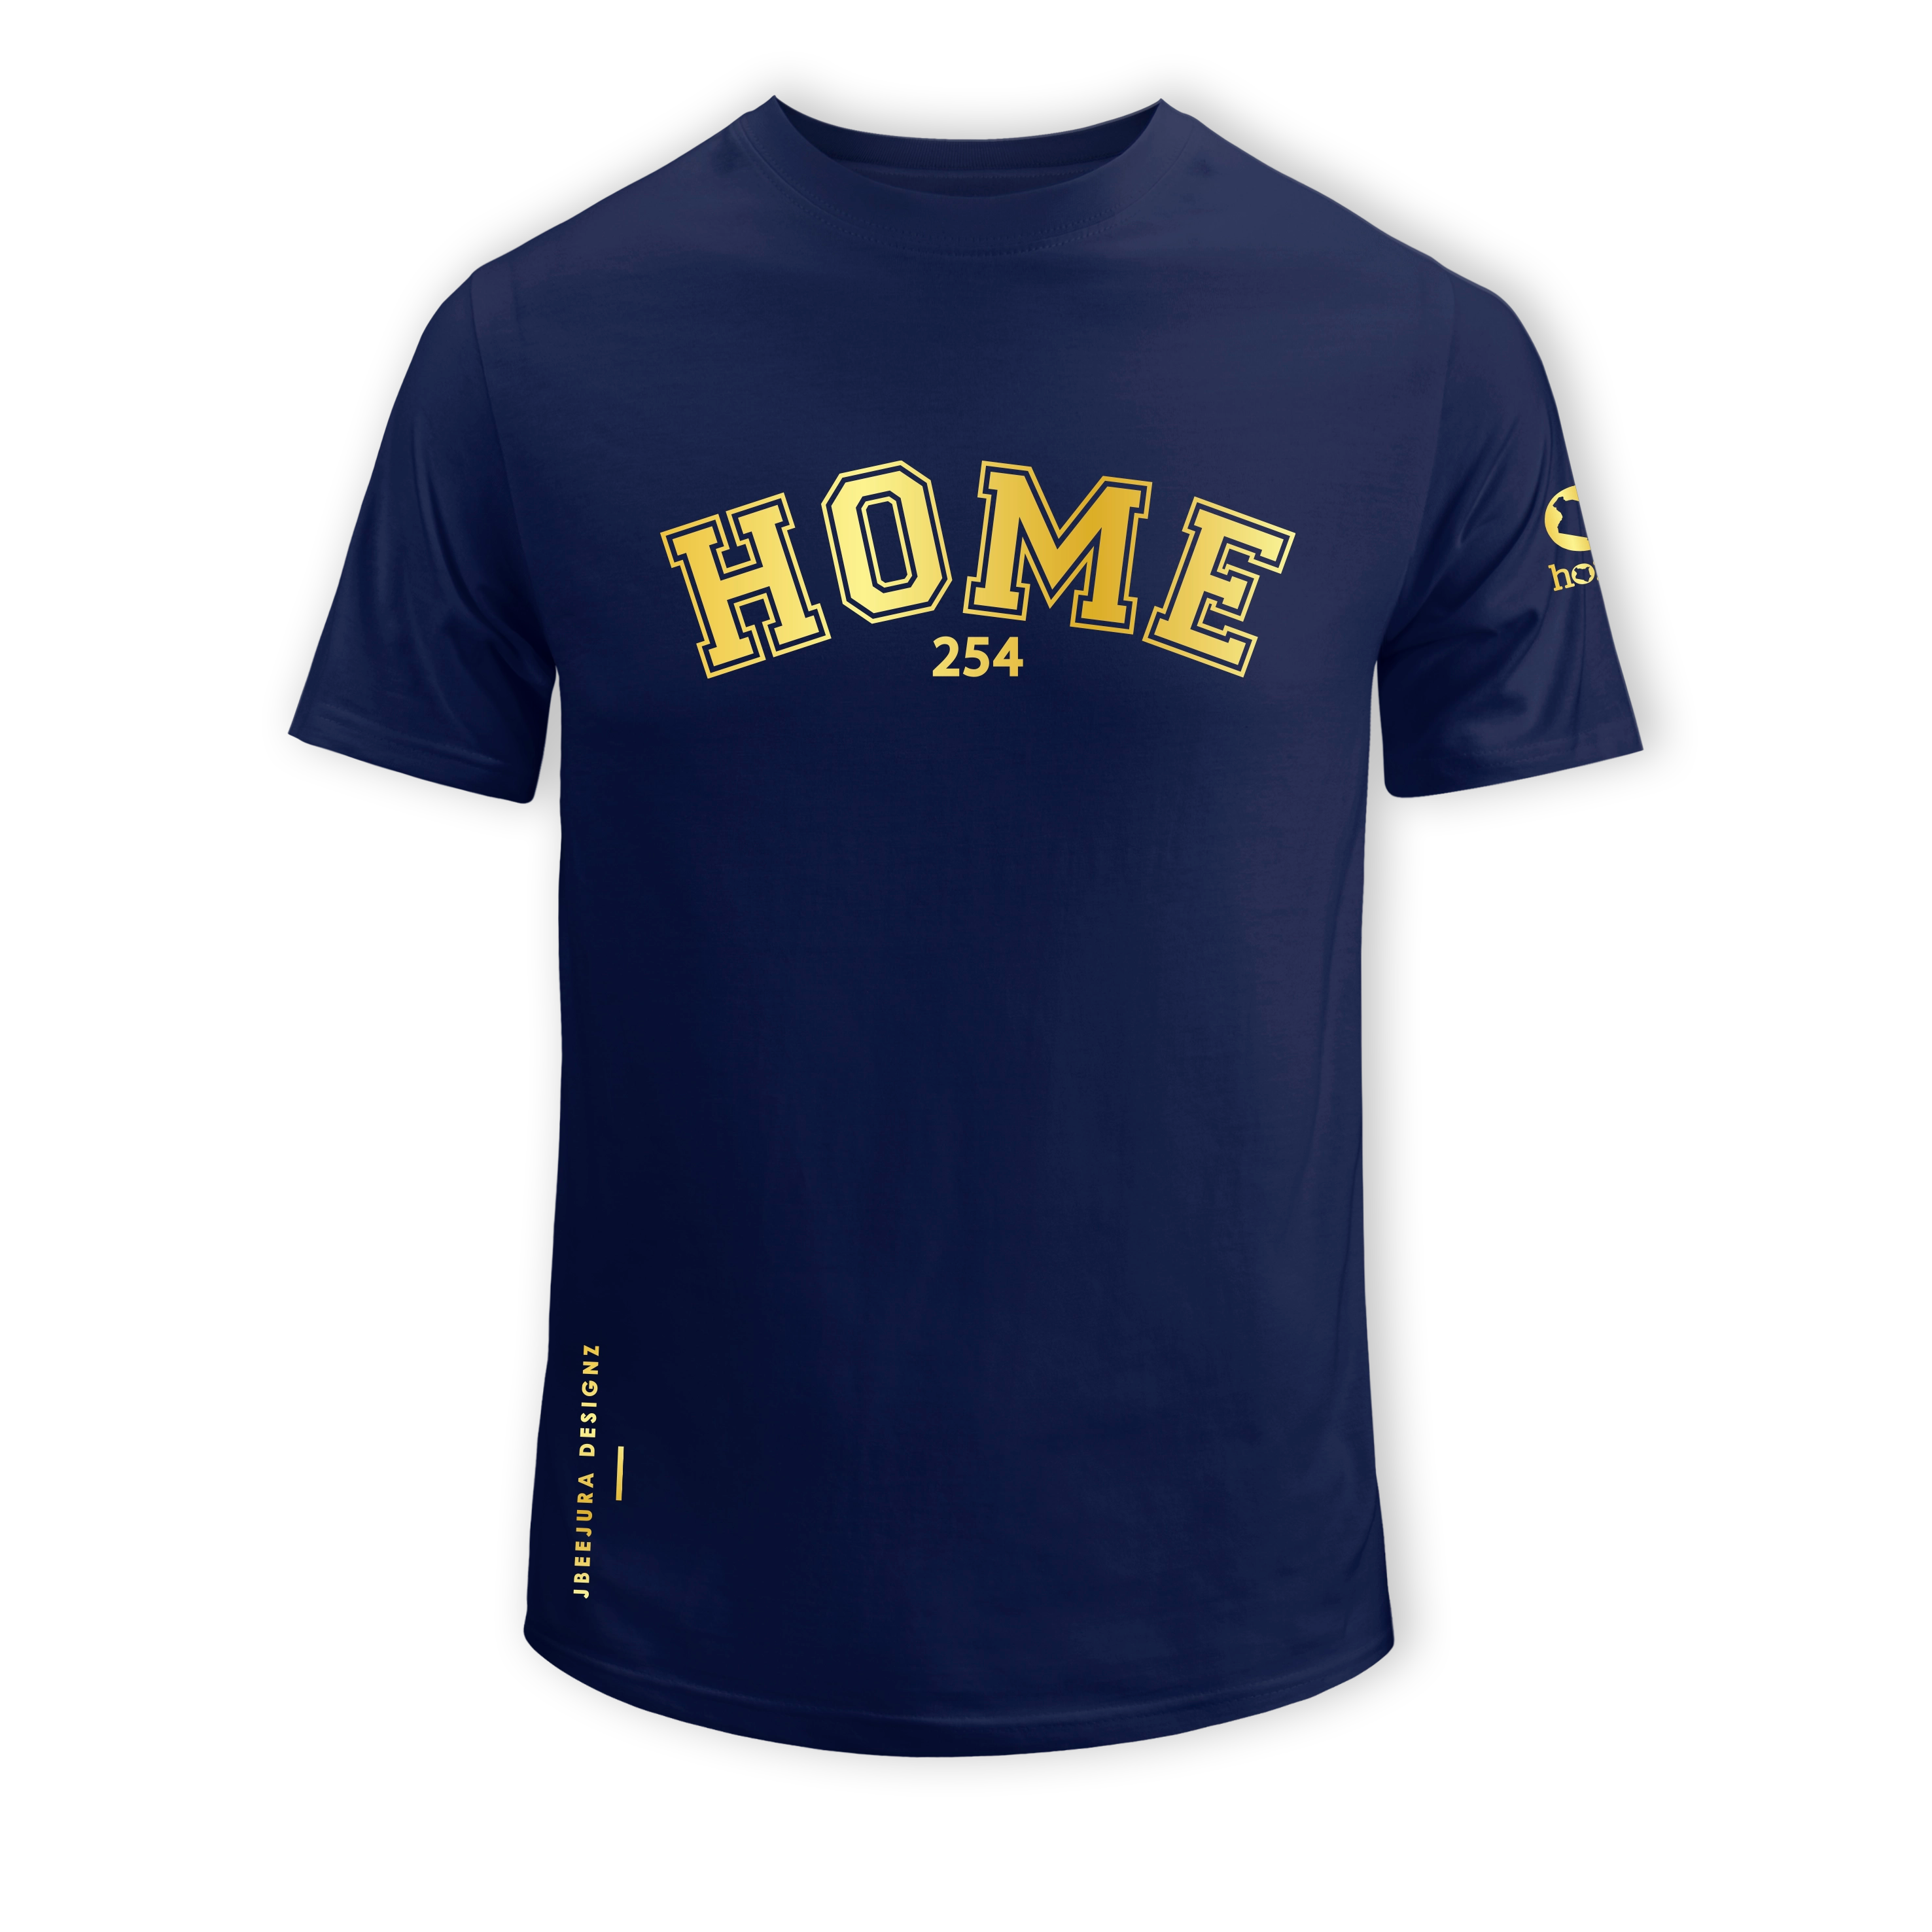 home_254 SHORT-SLEEVED NAVY BLUE T-SHIRT WITH A GOLD COLLEGE PRINT – COTTON PLUS FABRIC